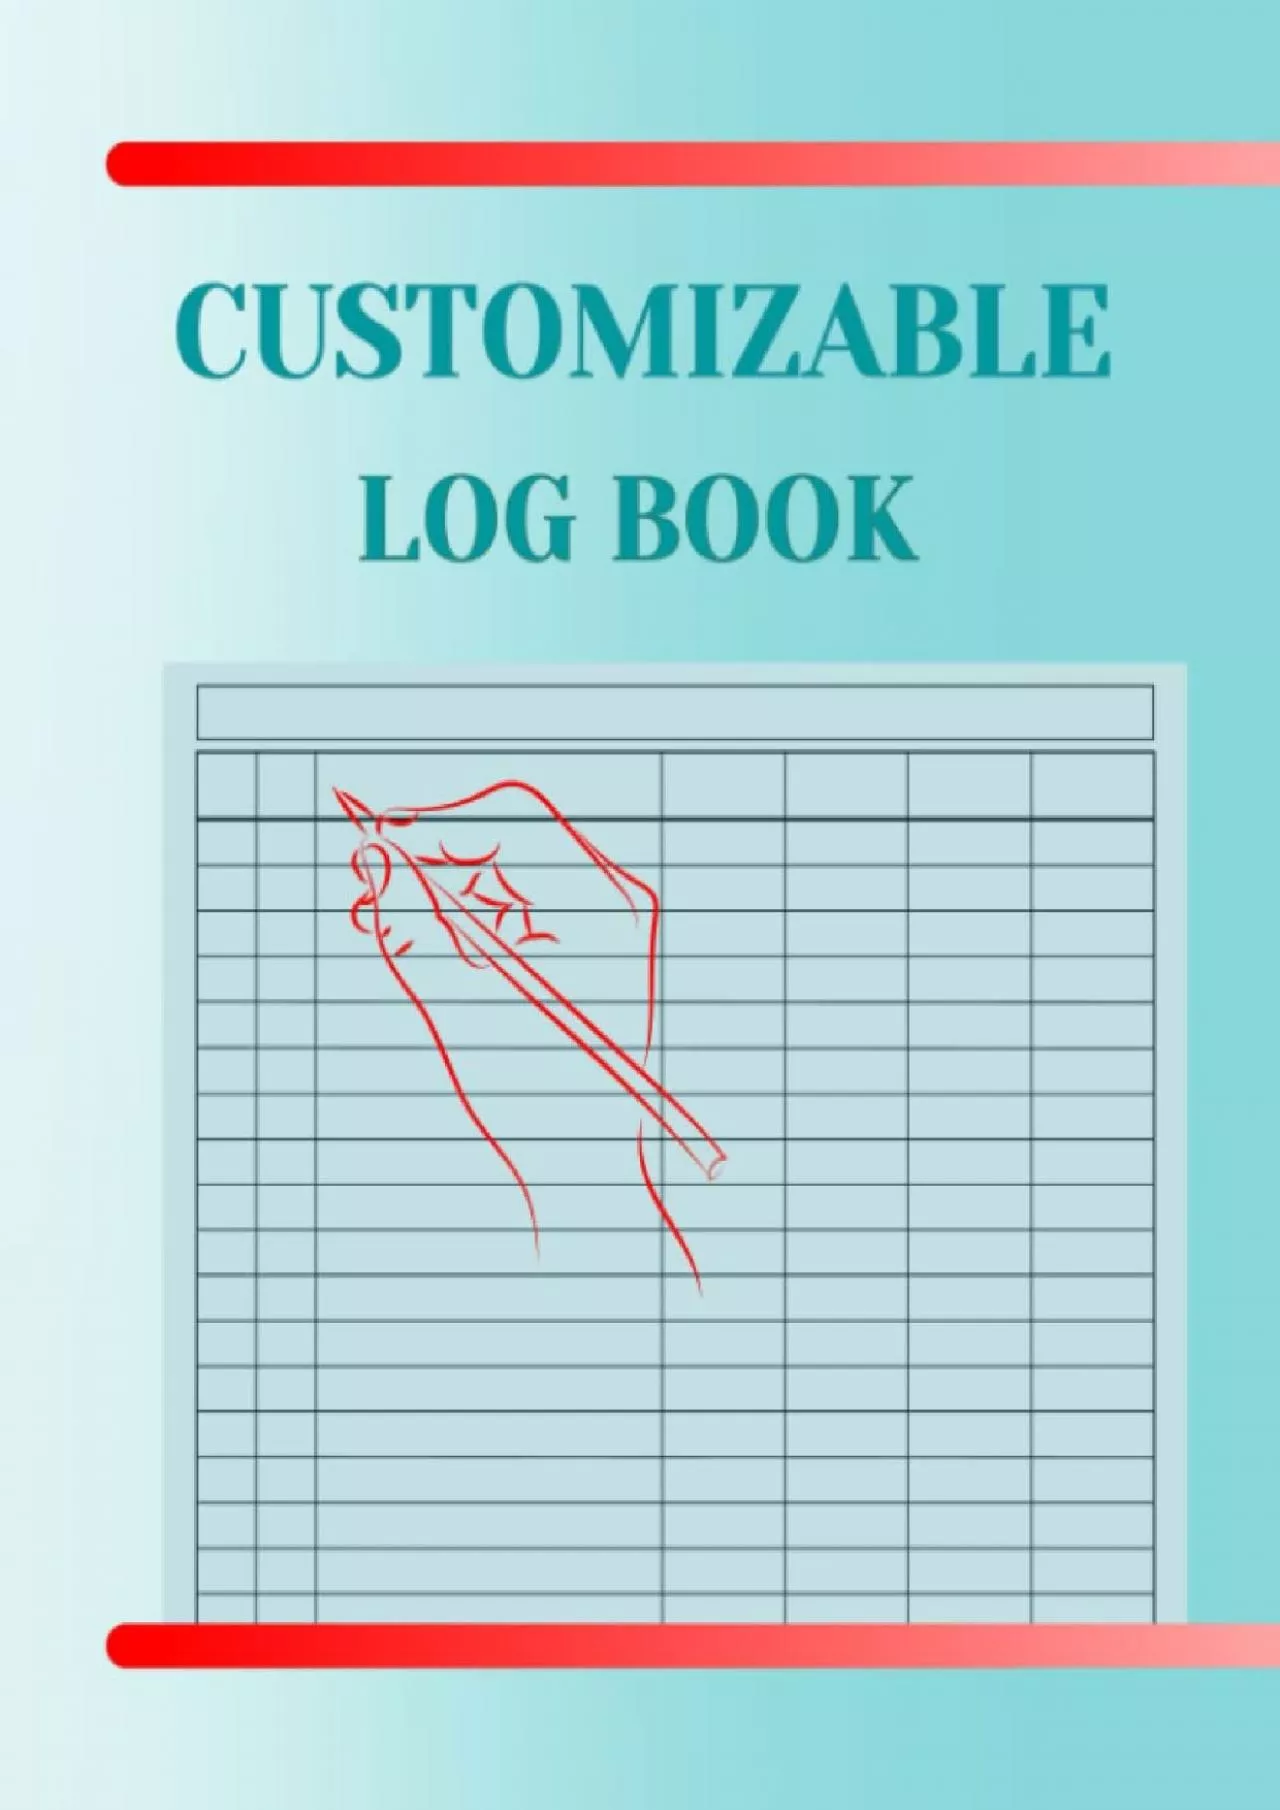 Customizable Log Book: 7 Column Log Book to Track Income and Expenses Debit and Credit